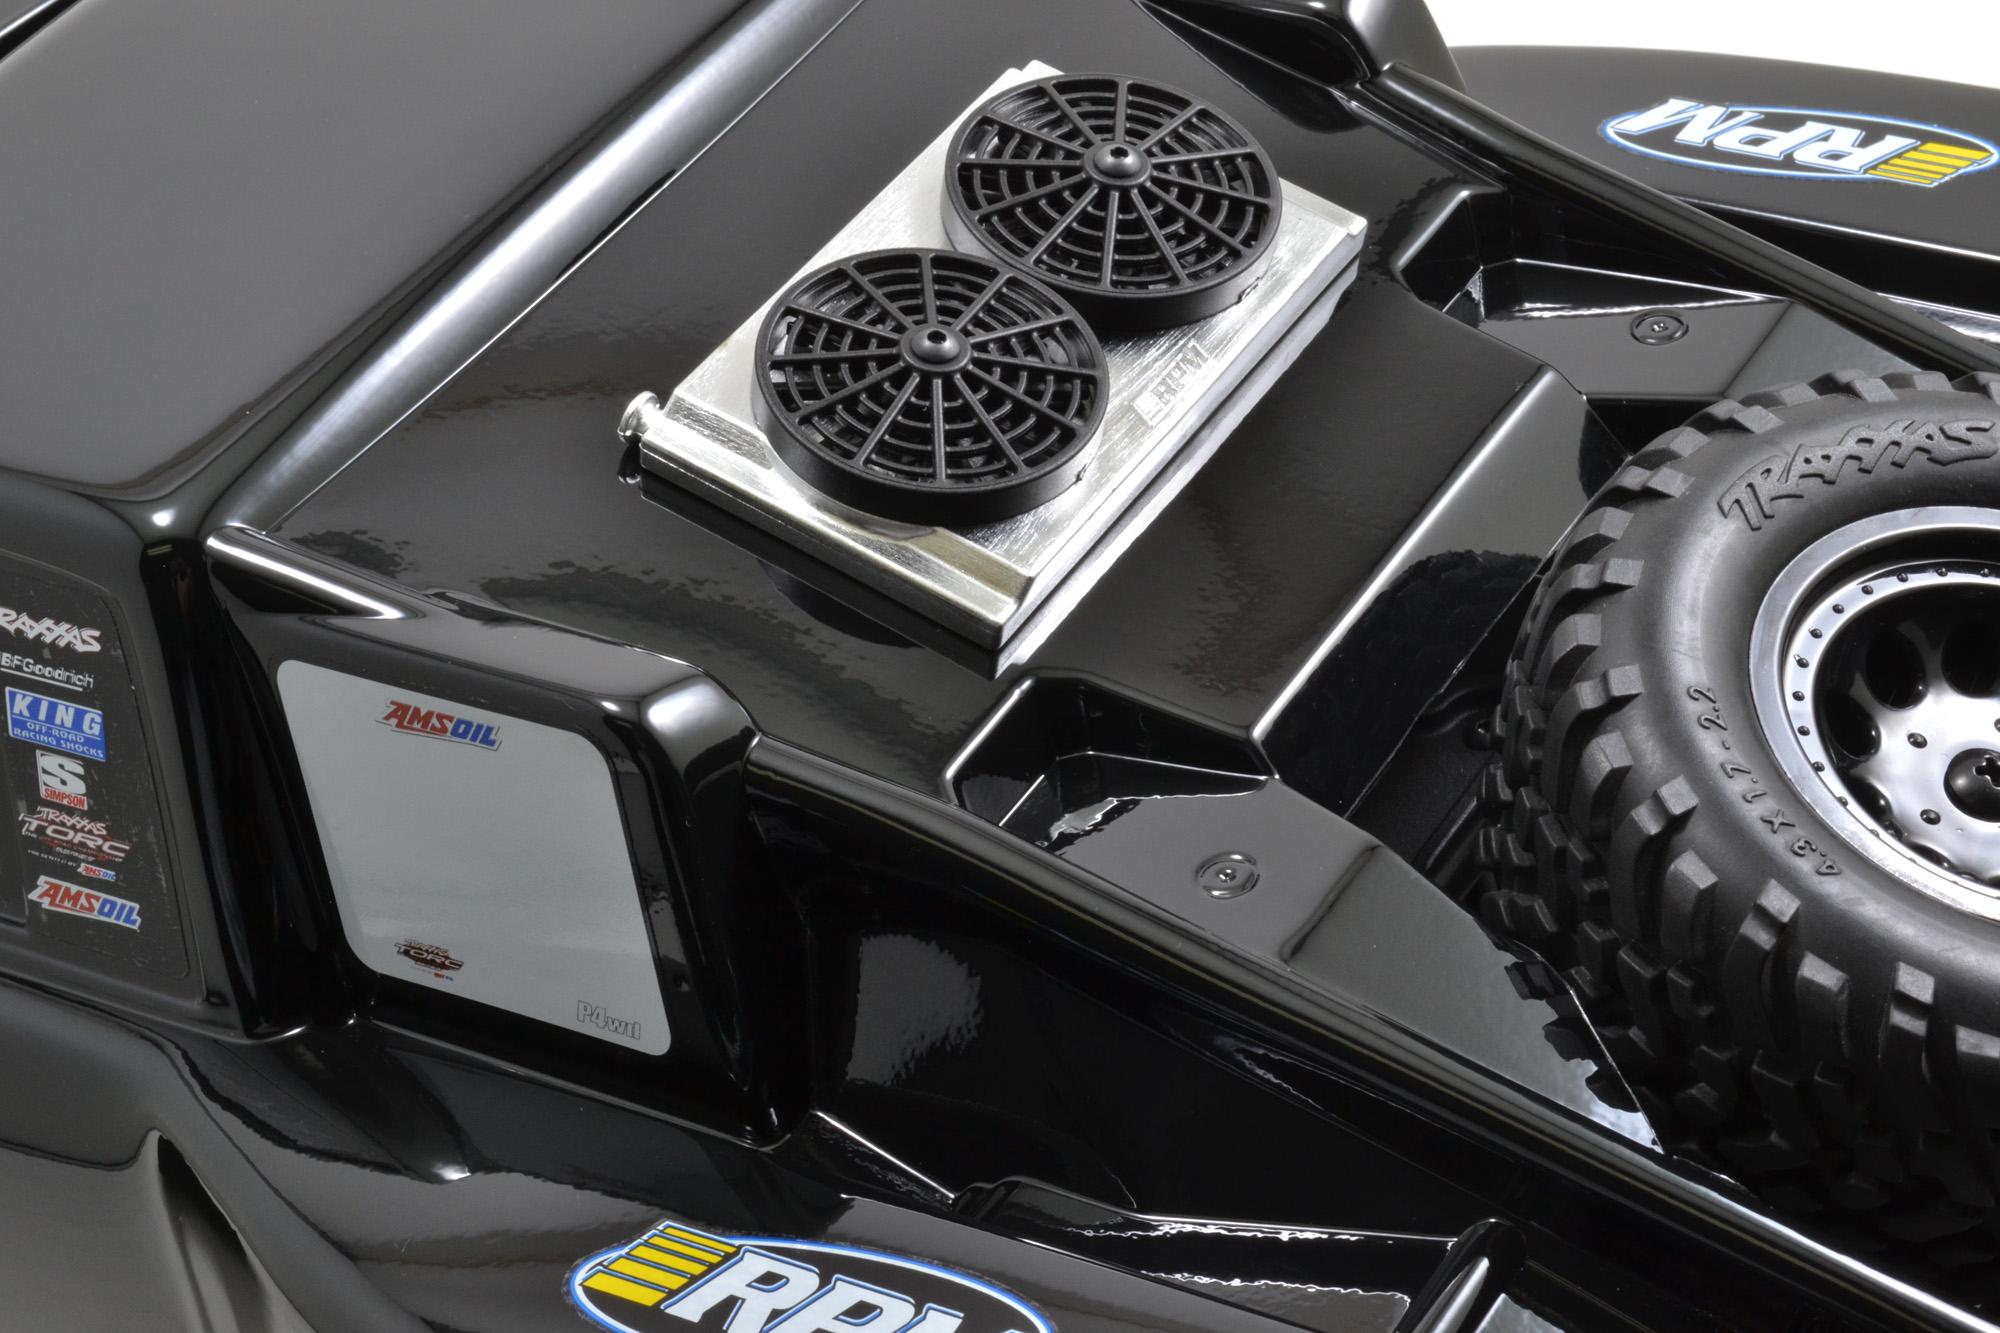 RPM 1:10 Scale Mock Radiator And Fans